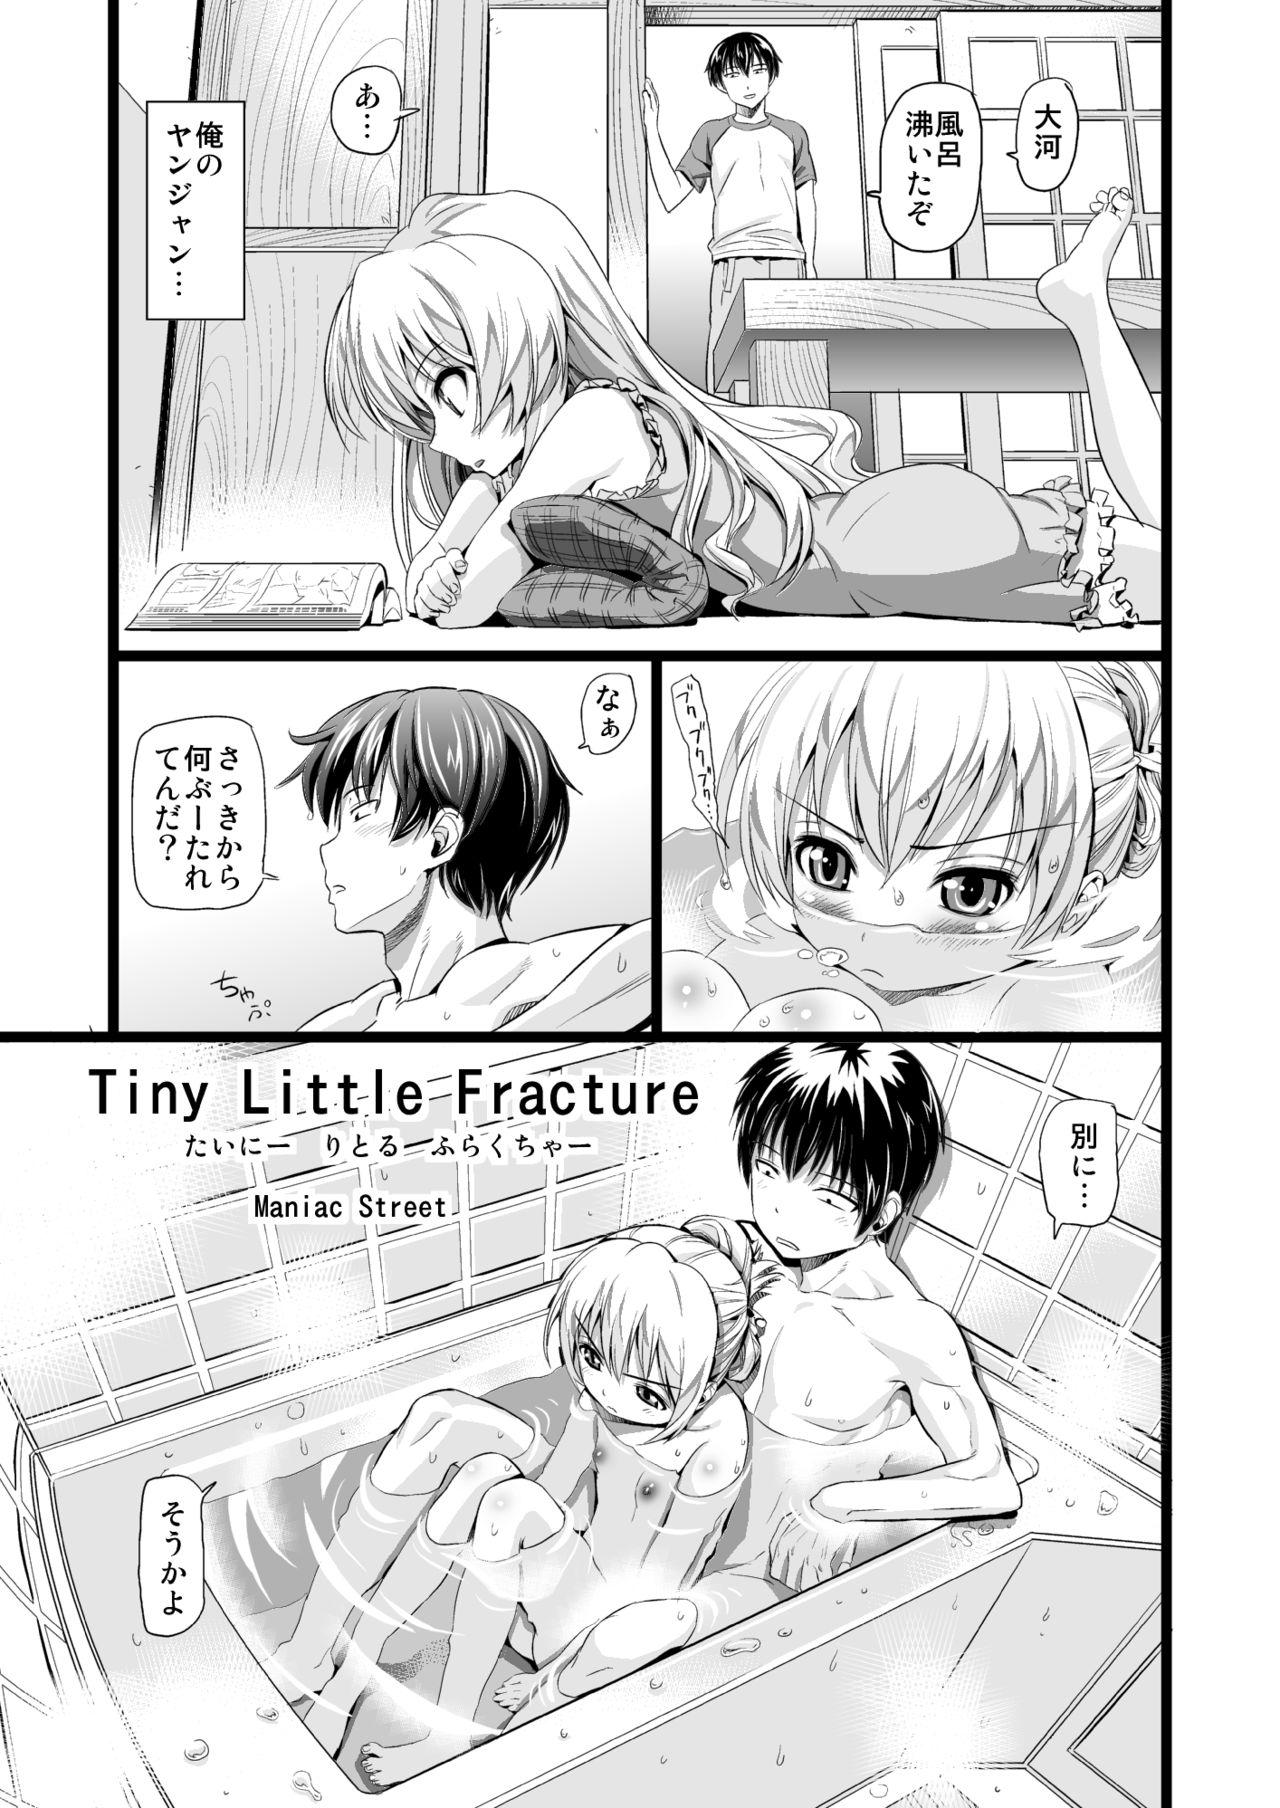 Shaved Tiny Little Fracture - Toradora Food - Page 2